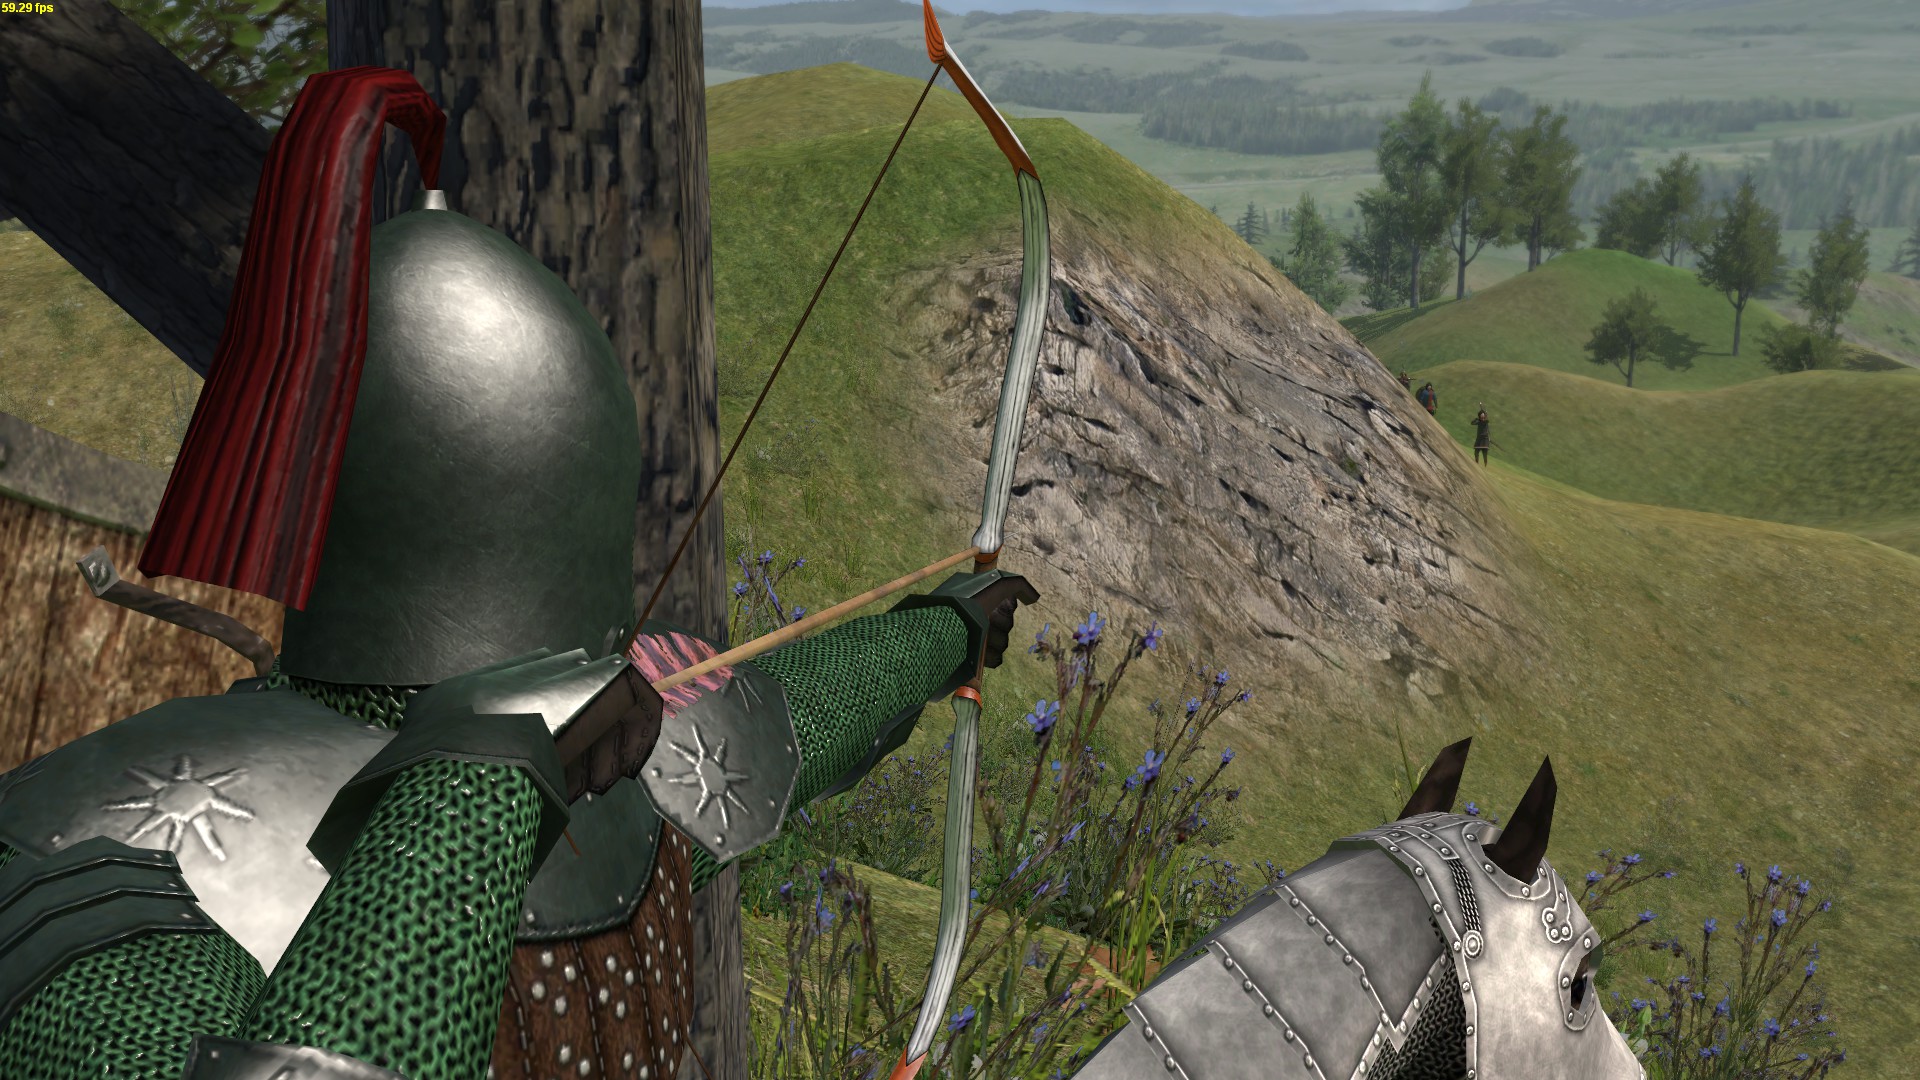 Warband Pendor. Mount and Blade Prophesy of Pendor. Mount & Blade: Warband. Mount and Blade Warband Prophesy of Pendor.